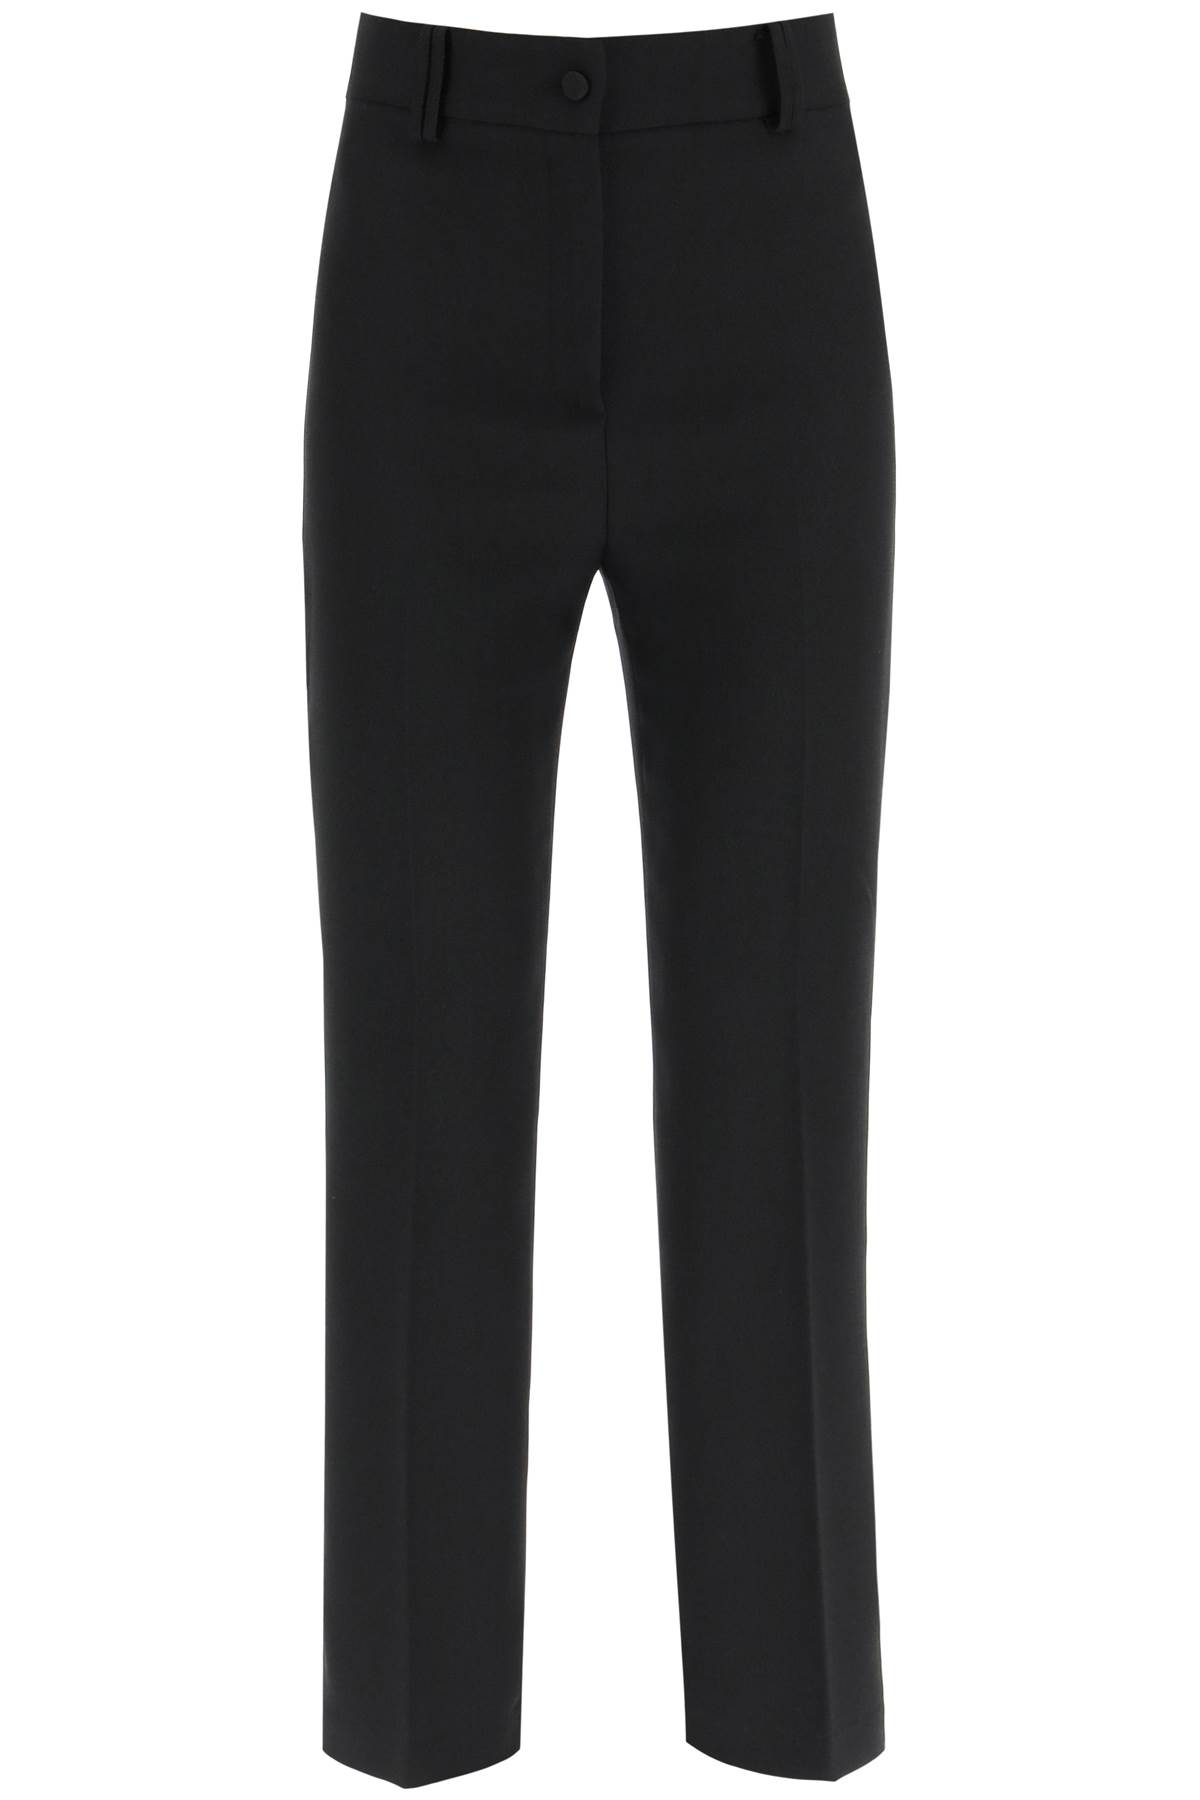 Hebe Studio Cady Straight-fit Trousers